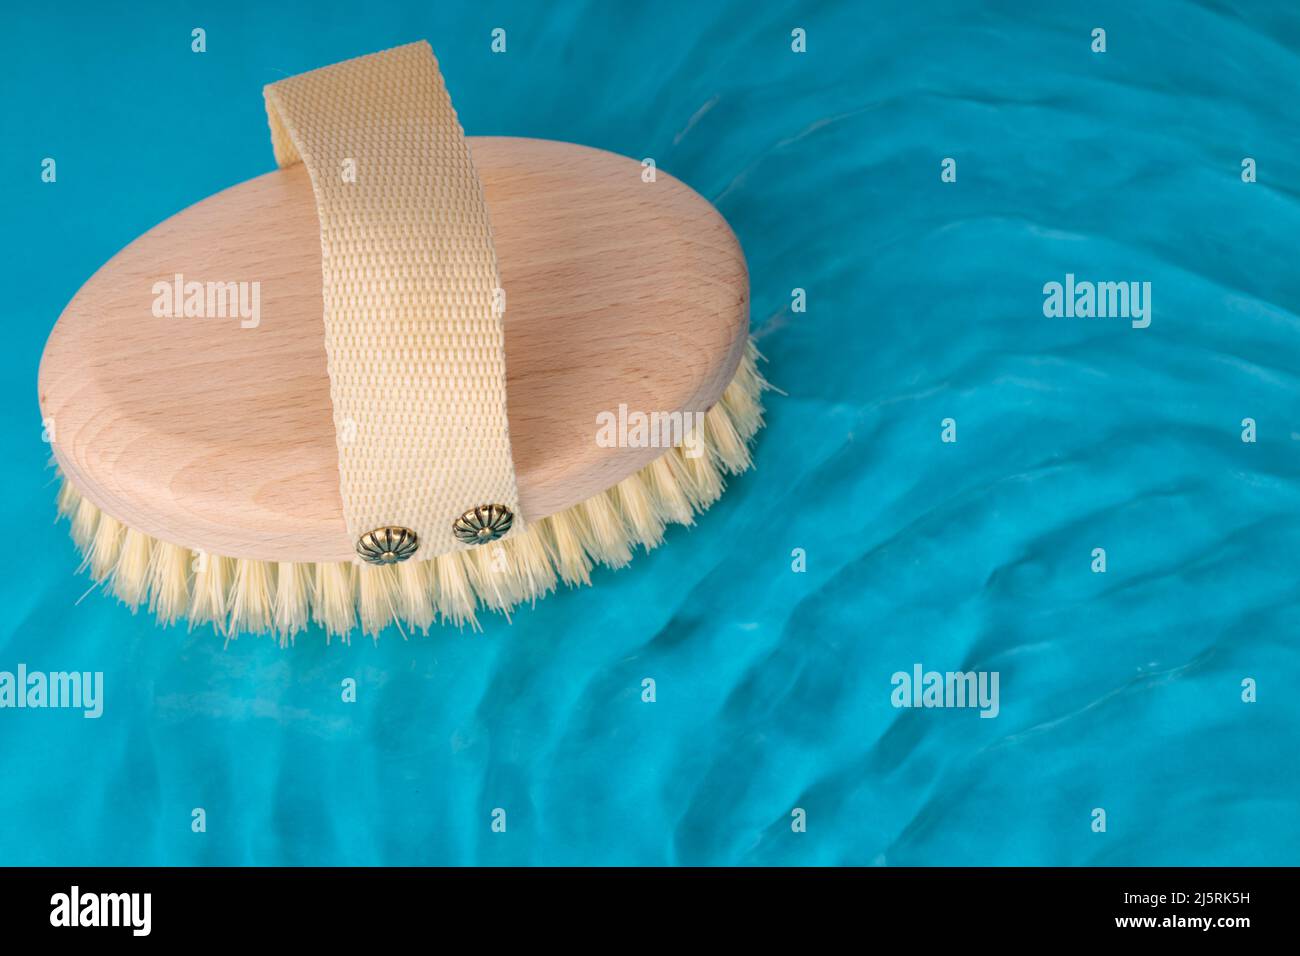 Natural wooden brush for brushing dry body against background of blue water. Top view Stock Photo